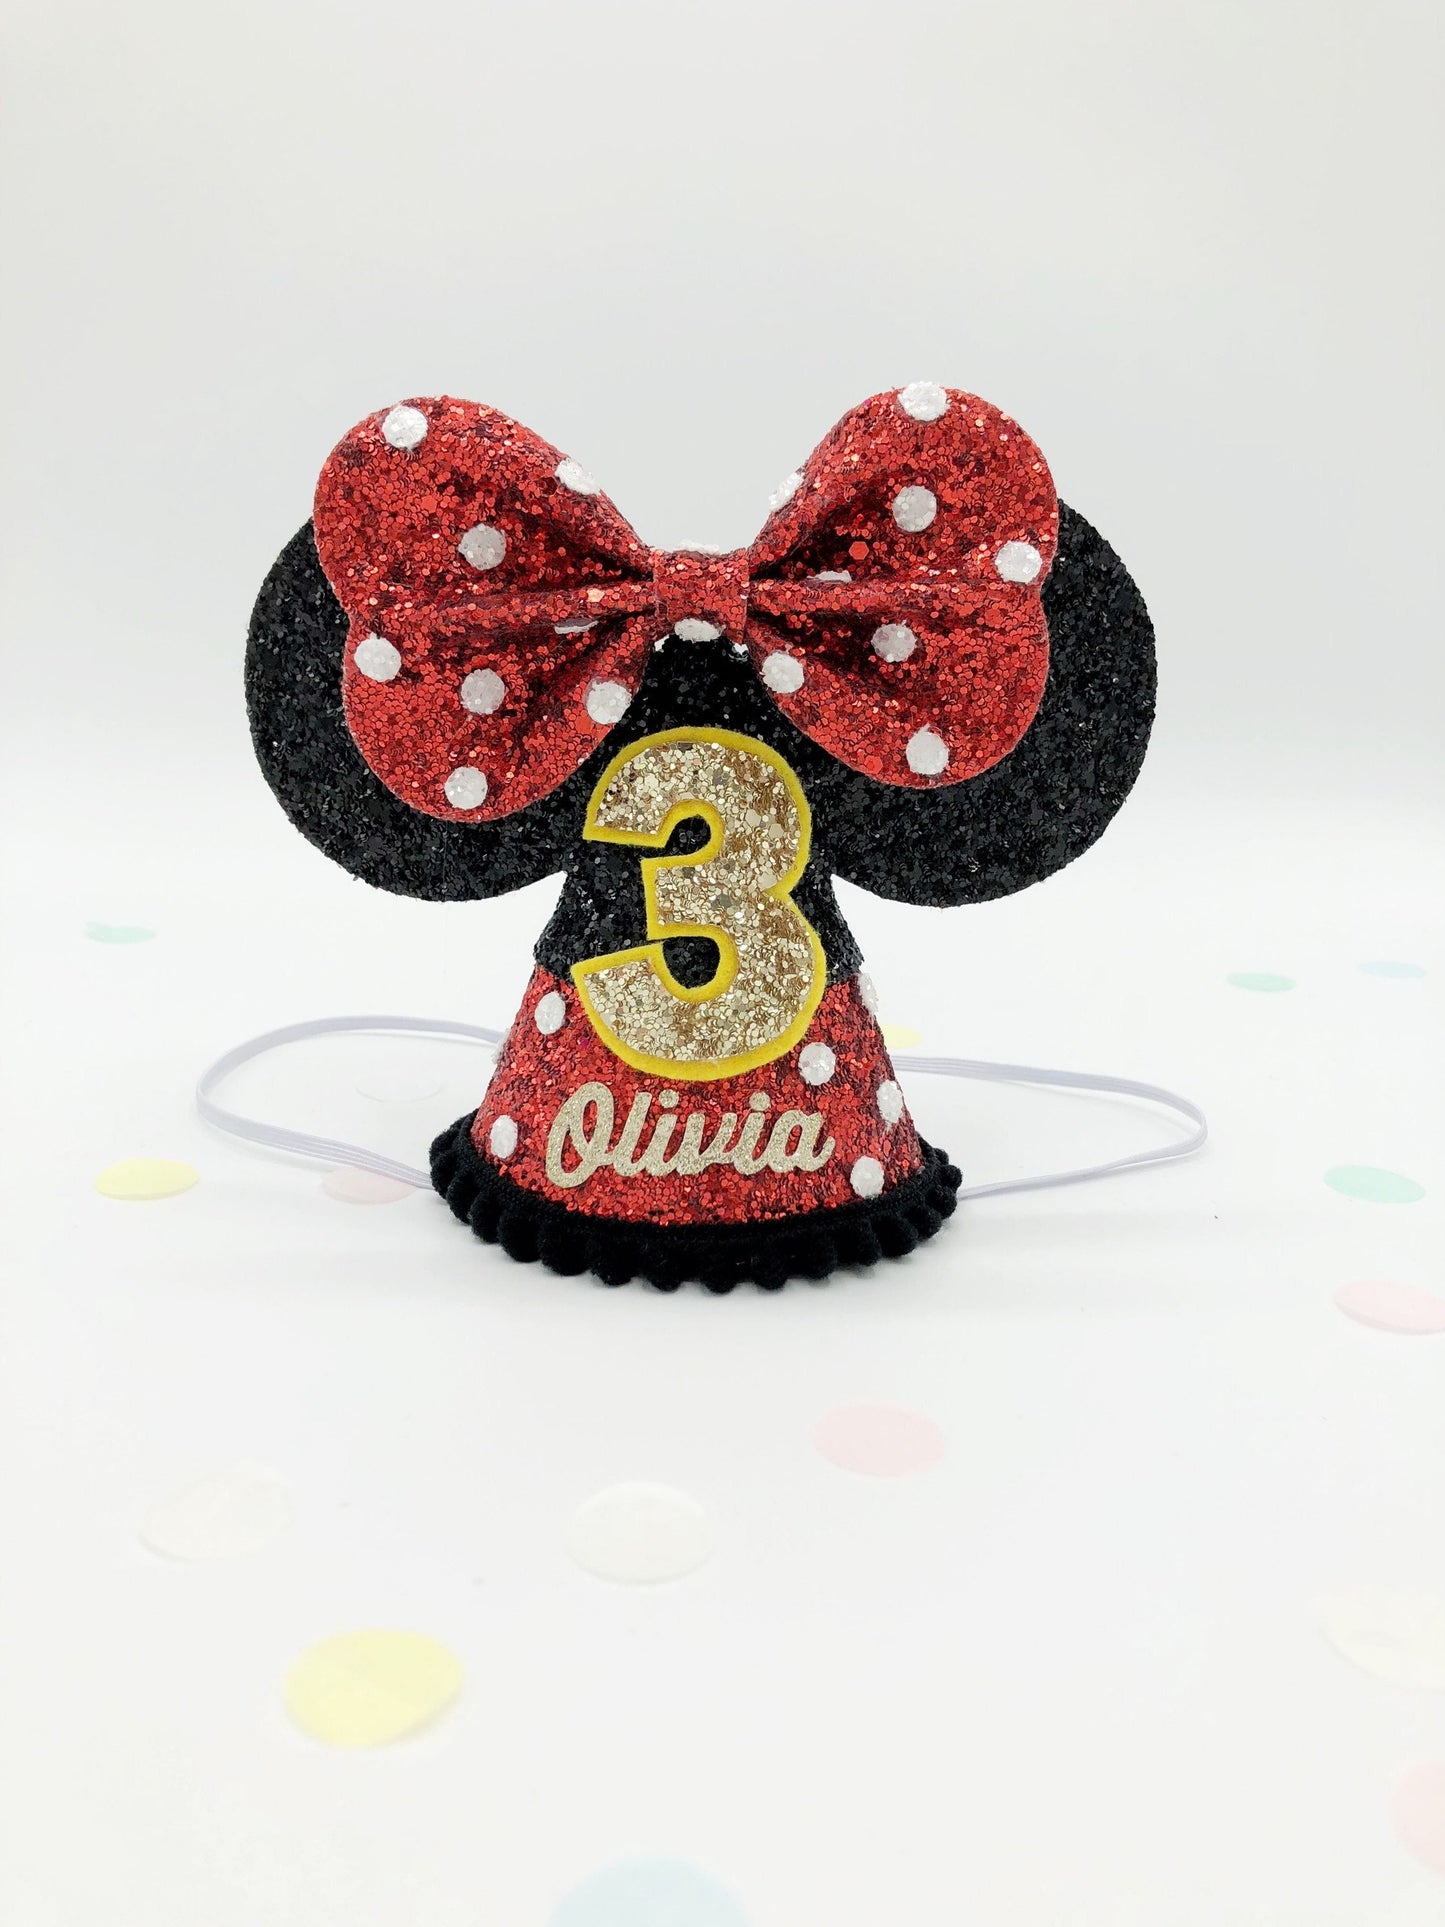 Minnie Mouse cone hat in red and black